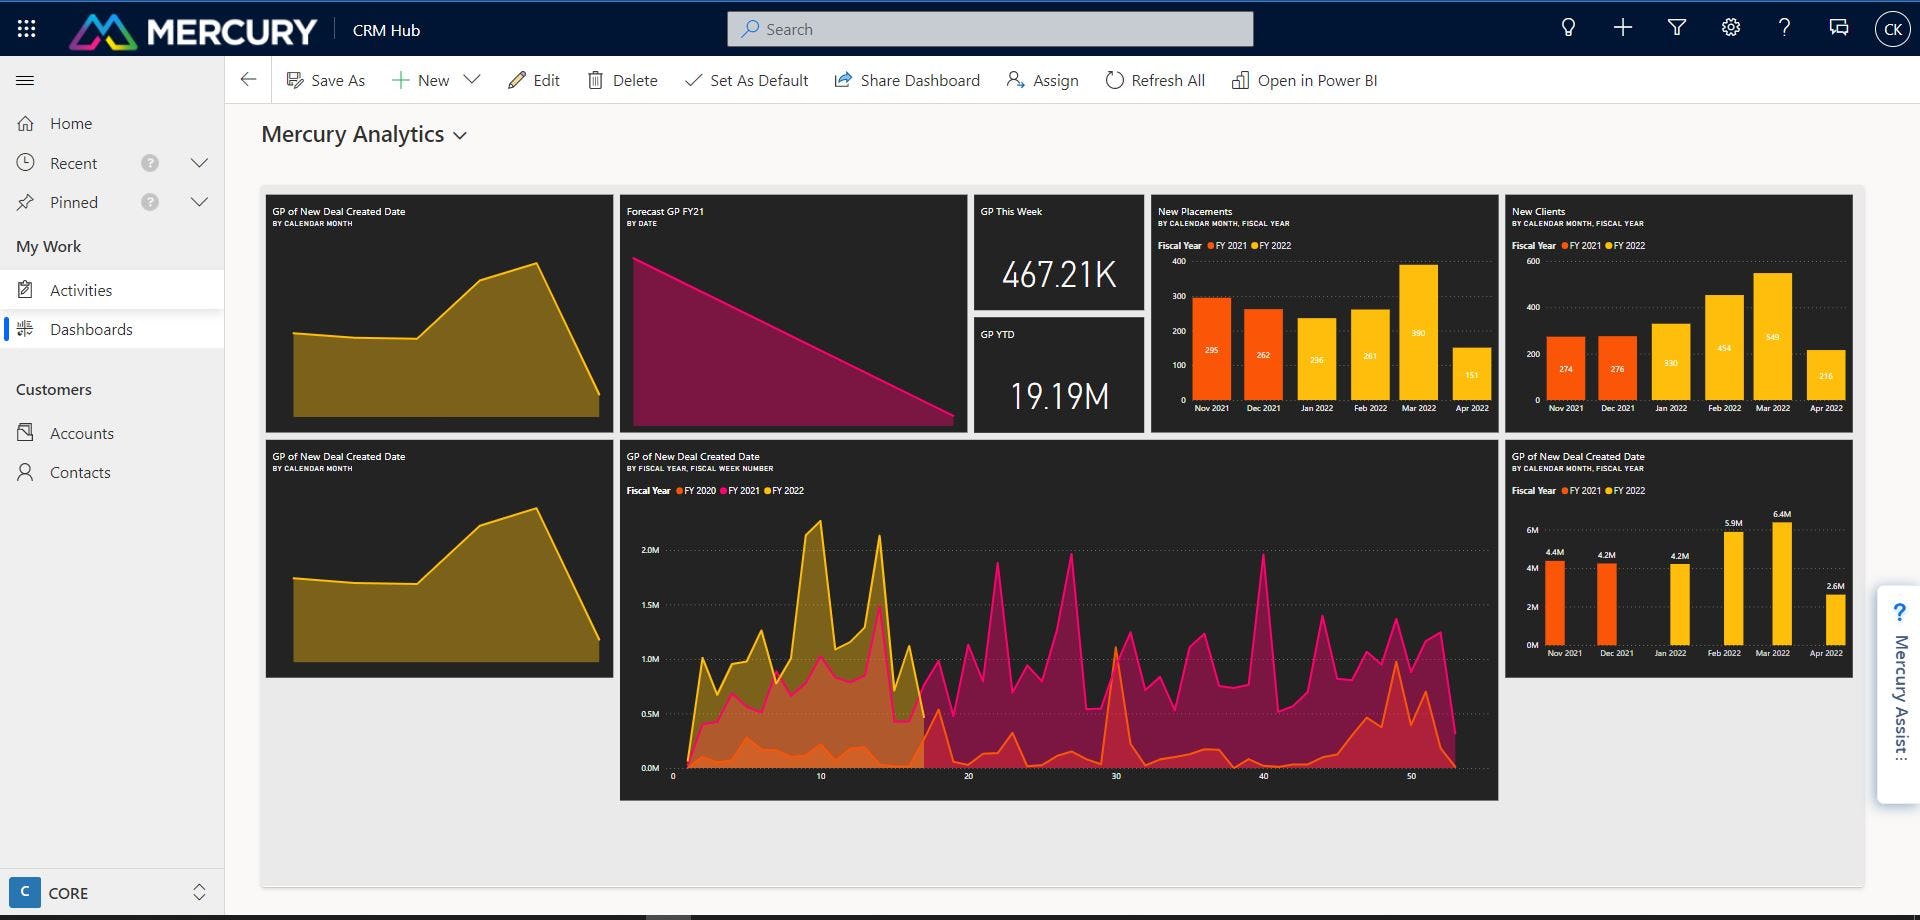 Mercury Software - Mercury’s reporting and dashboard capabilities are integrated with Dynamics 365, allowing you to leverage Microsoft Power BI while also providing access and visibility to all data captured across numerous business apps.